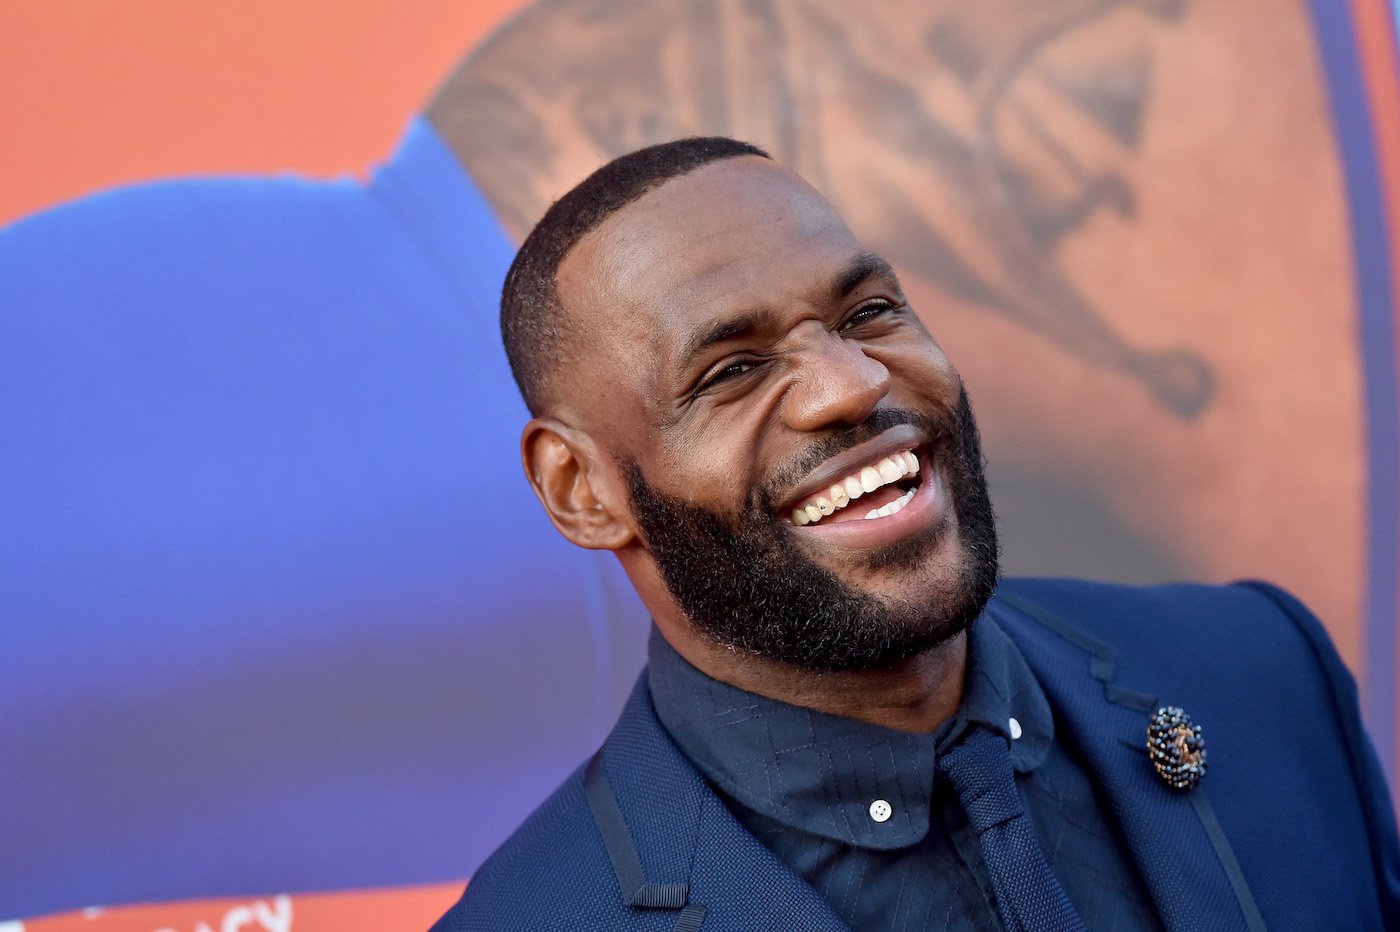 LeBron James attends the premiere of Warner Bros' 'Space Jam: A New Legacy' at Regal LA Live in July 2021